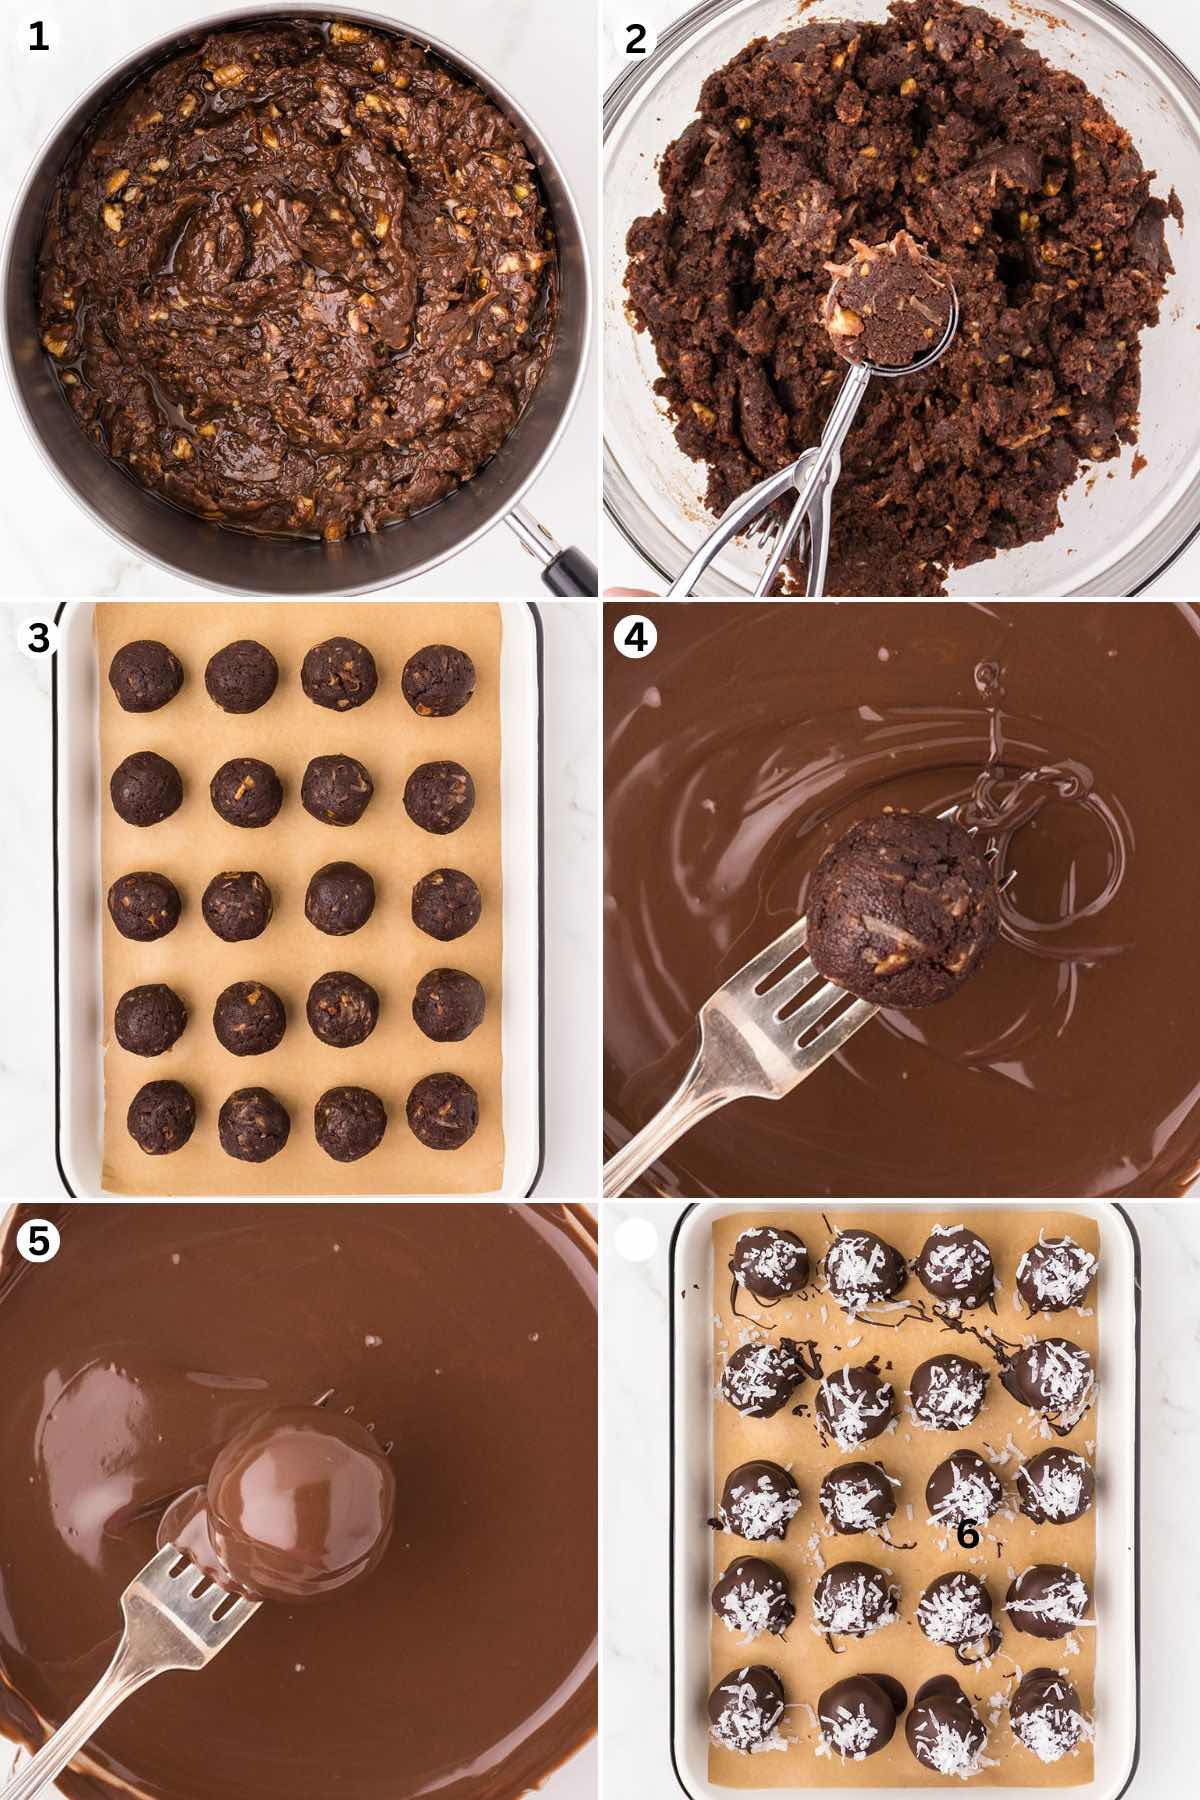 Make the filling mixture. Scoop the filling and roll into smooth balls. Place the truffle in baking trays. Dip each truffle into the melted chocolate. Sprinkle with shredded coconut.